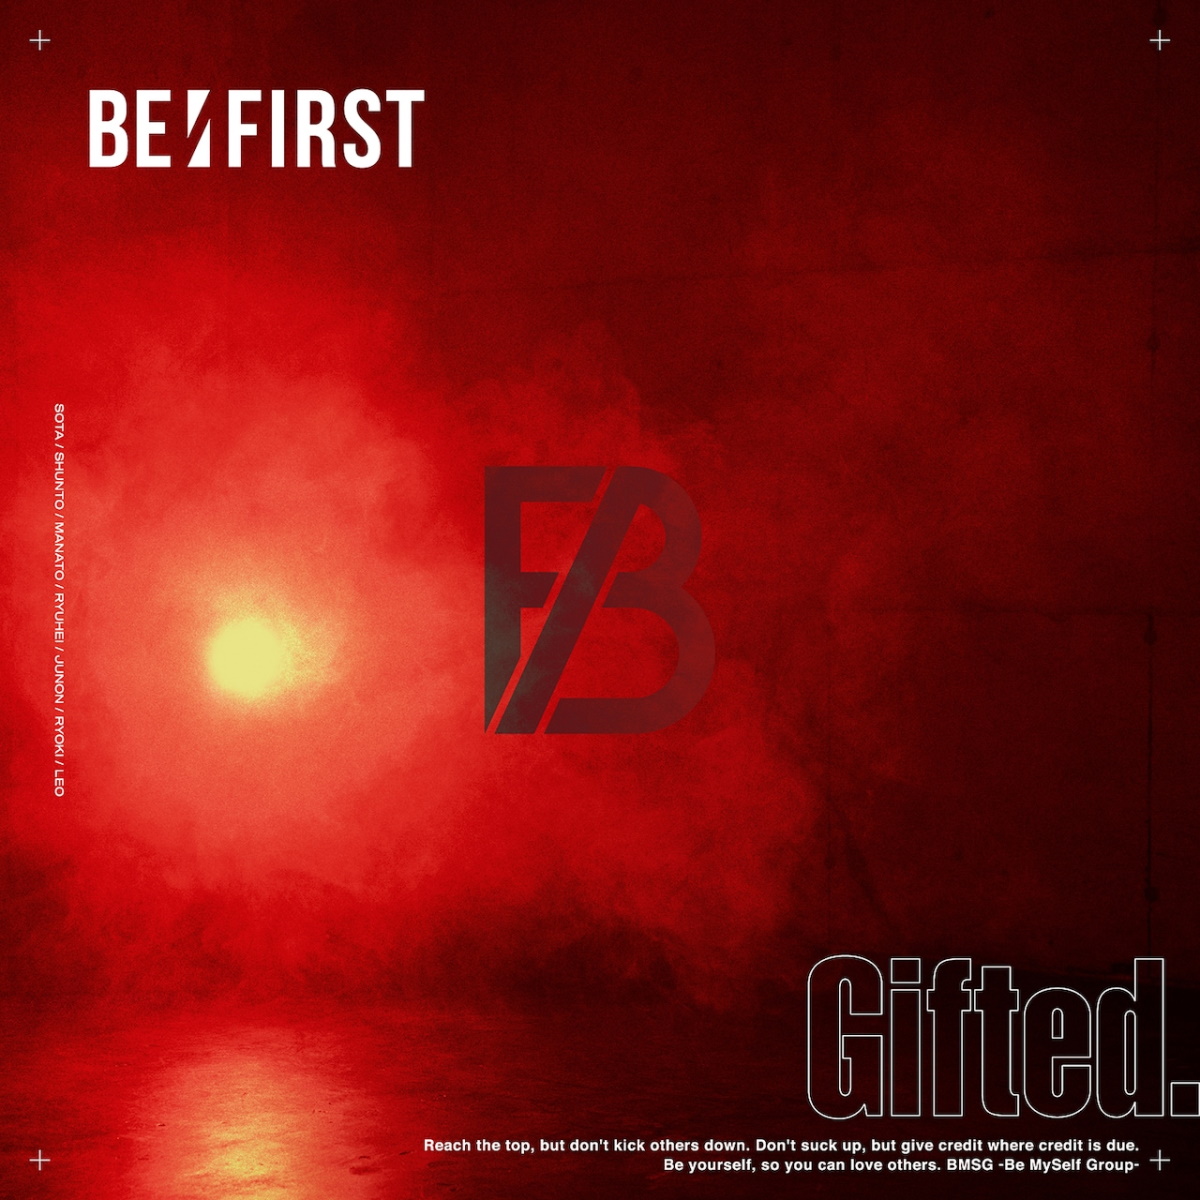 『BE:FIRST - First Step 歌詞』収録の『Gifted.』ジャケット